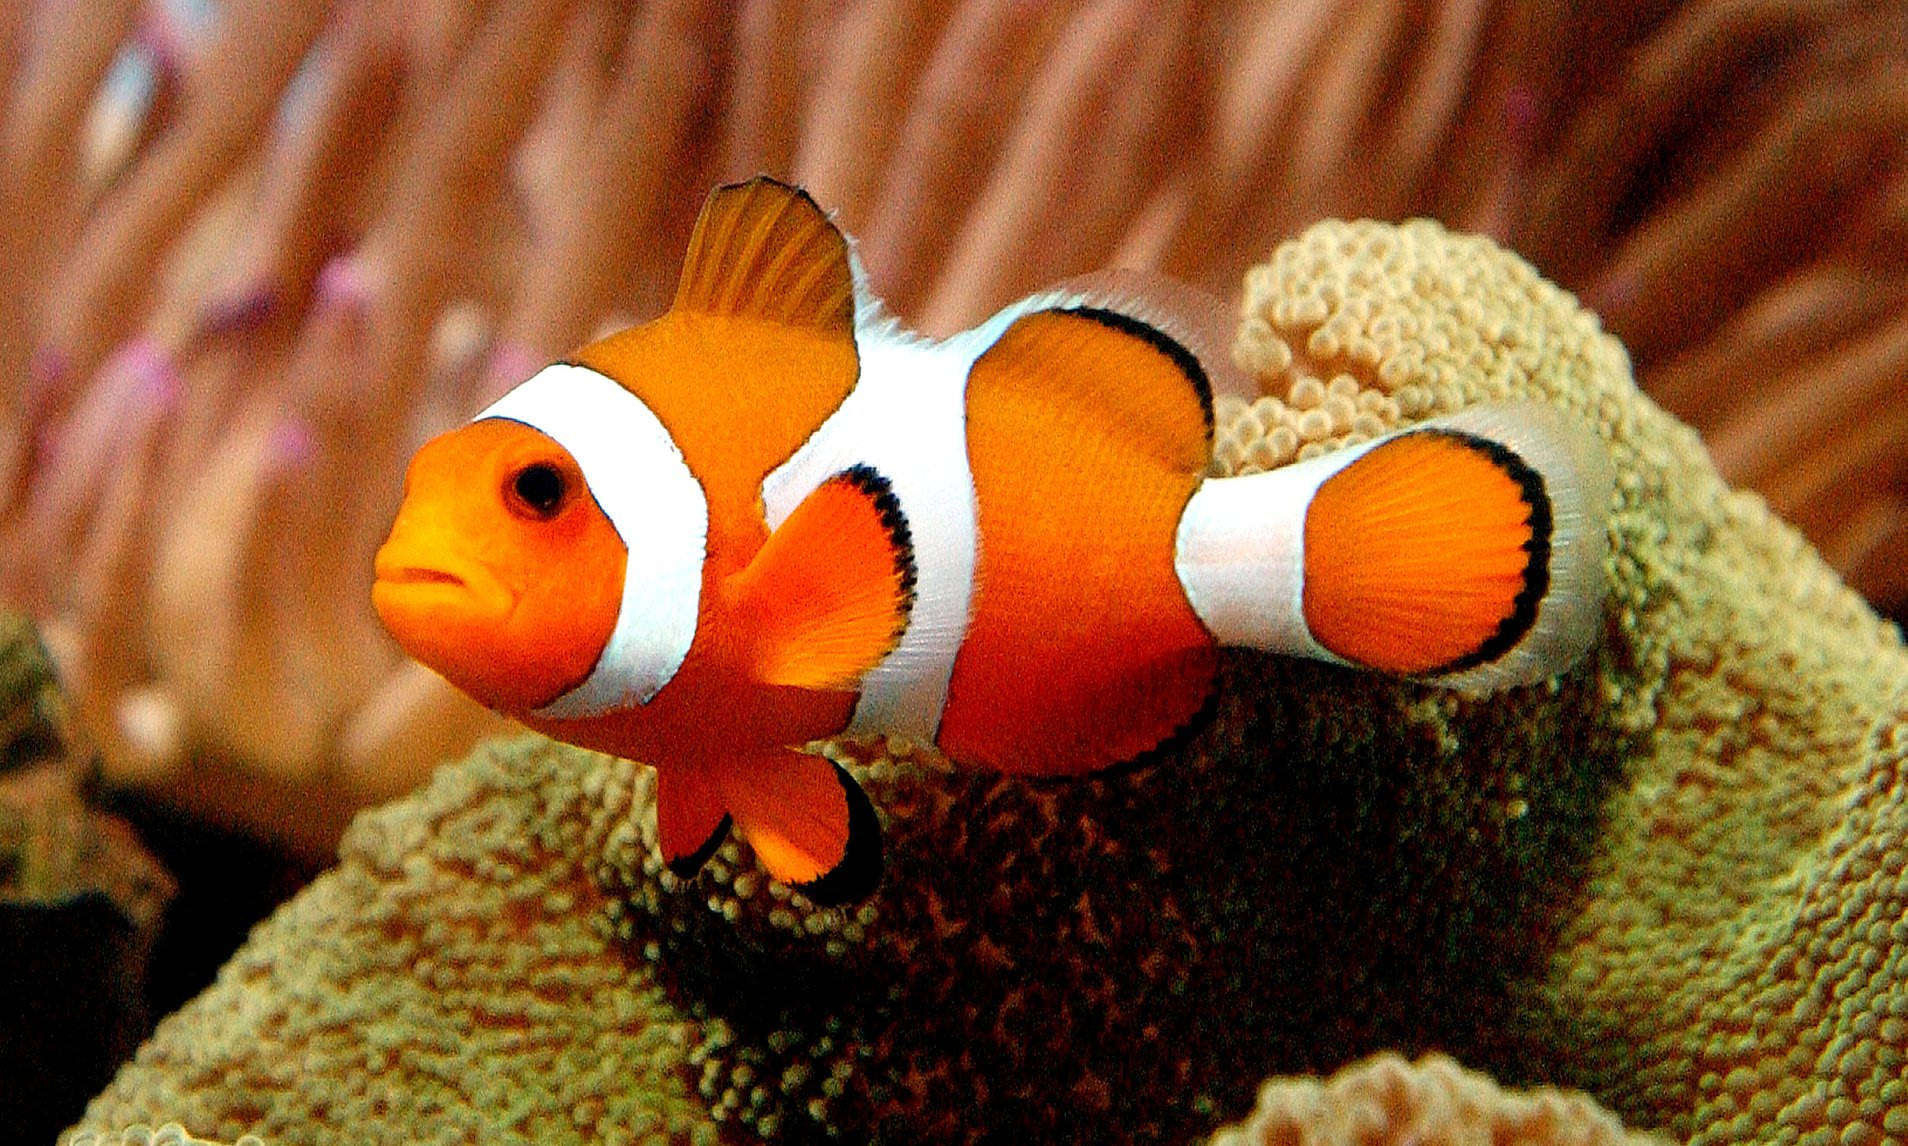 Nemo Cool Fish On Coral Reef Wallpaper